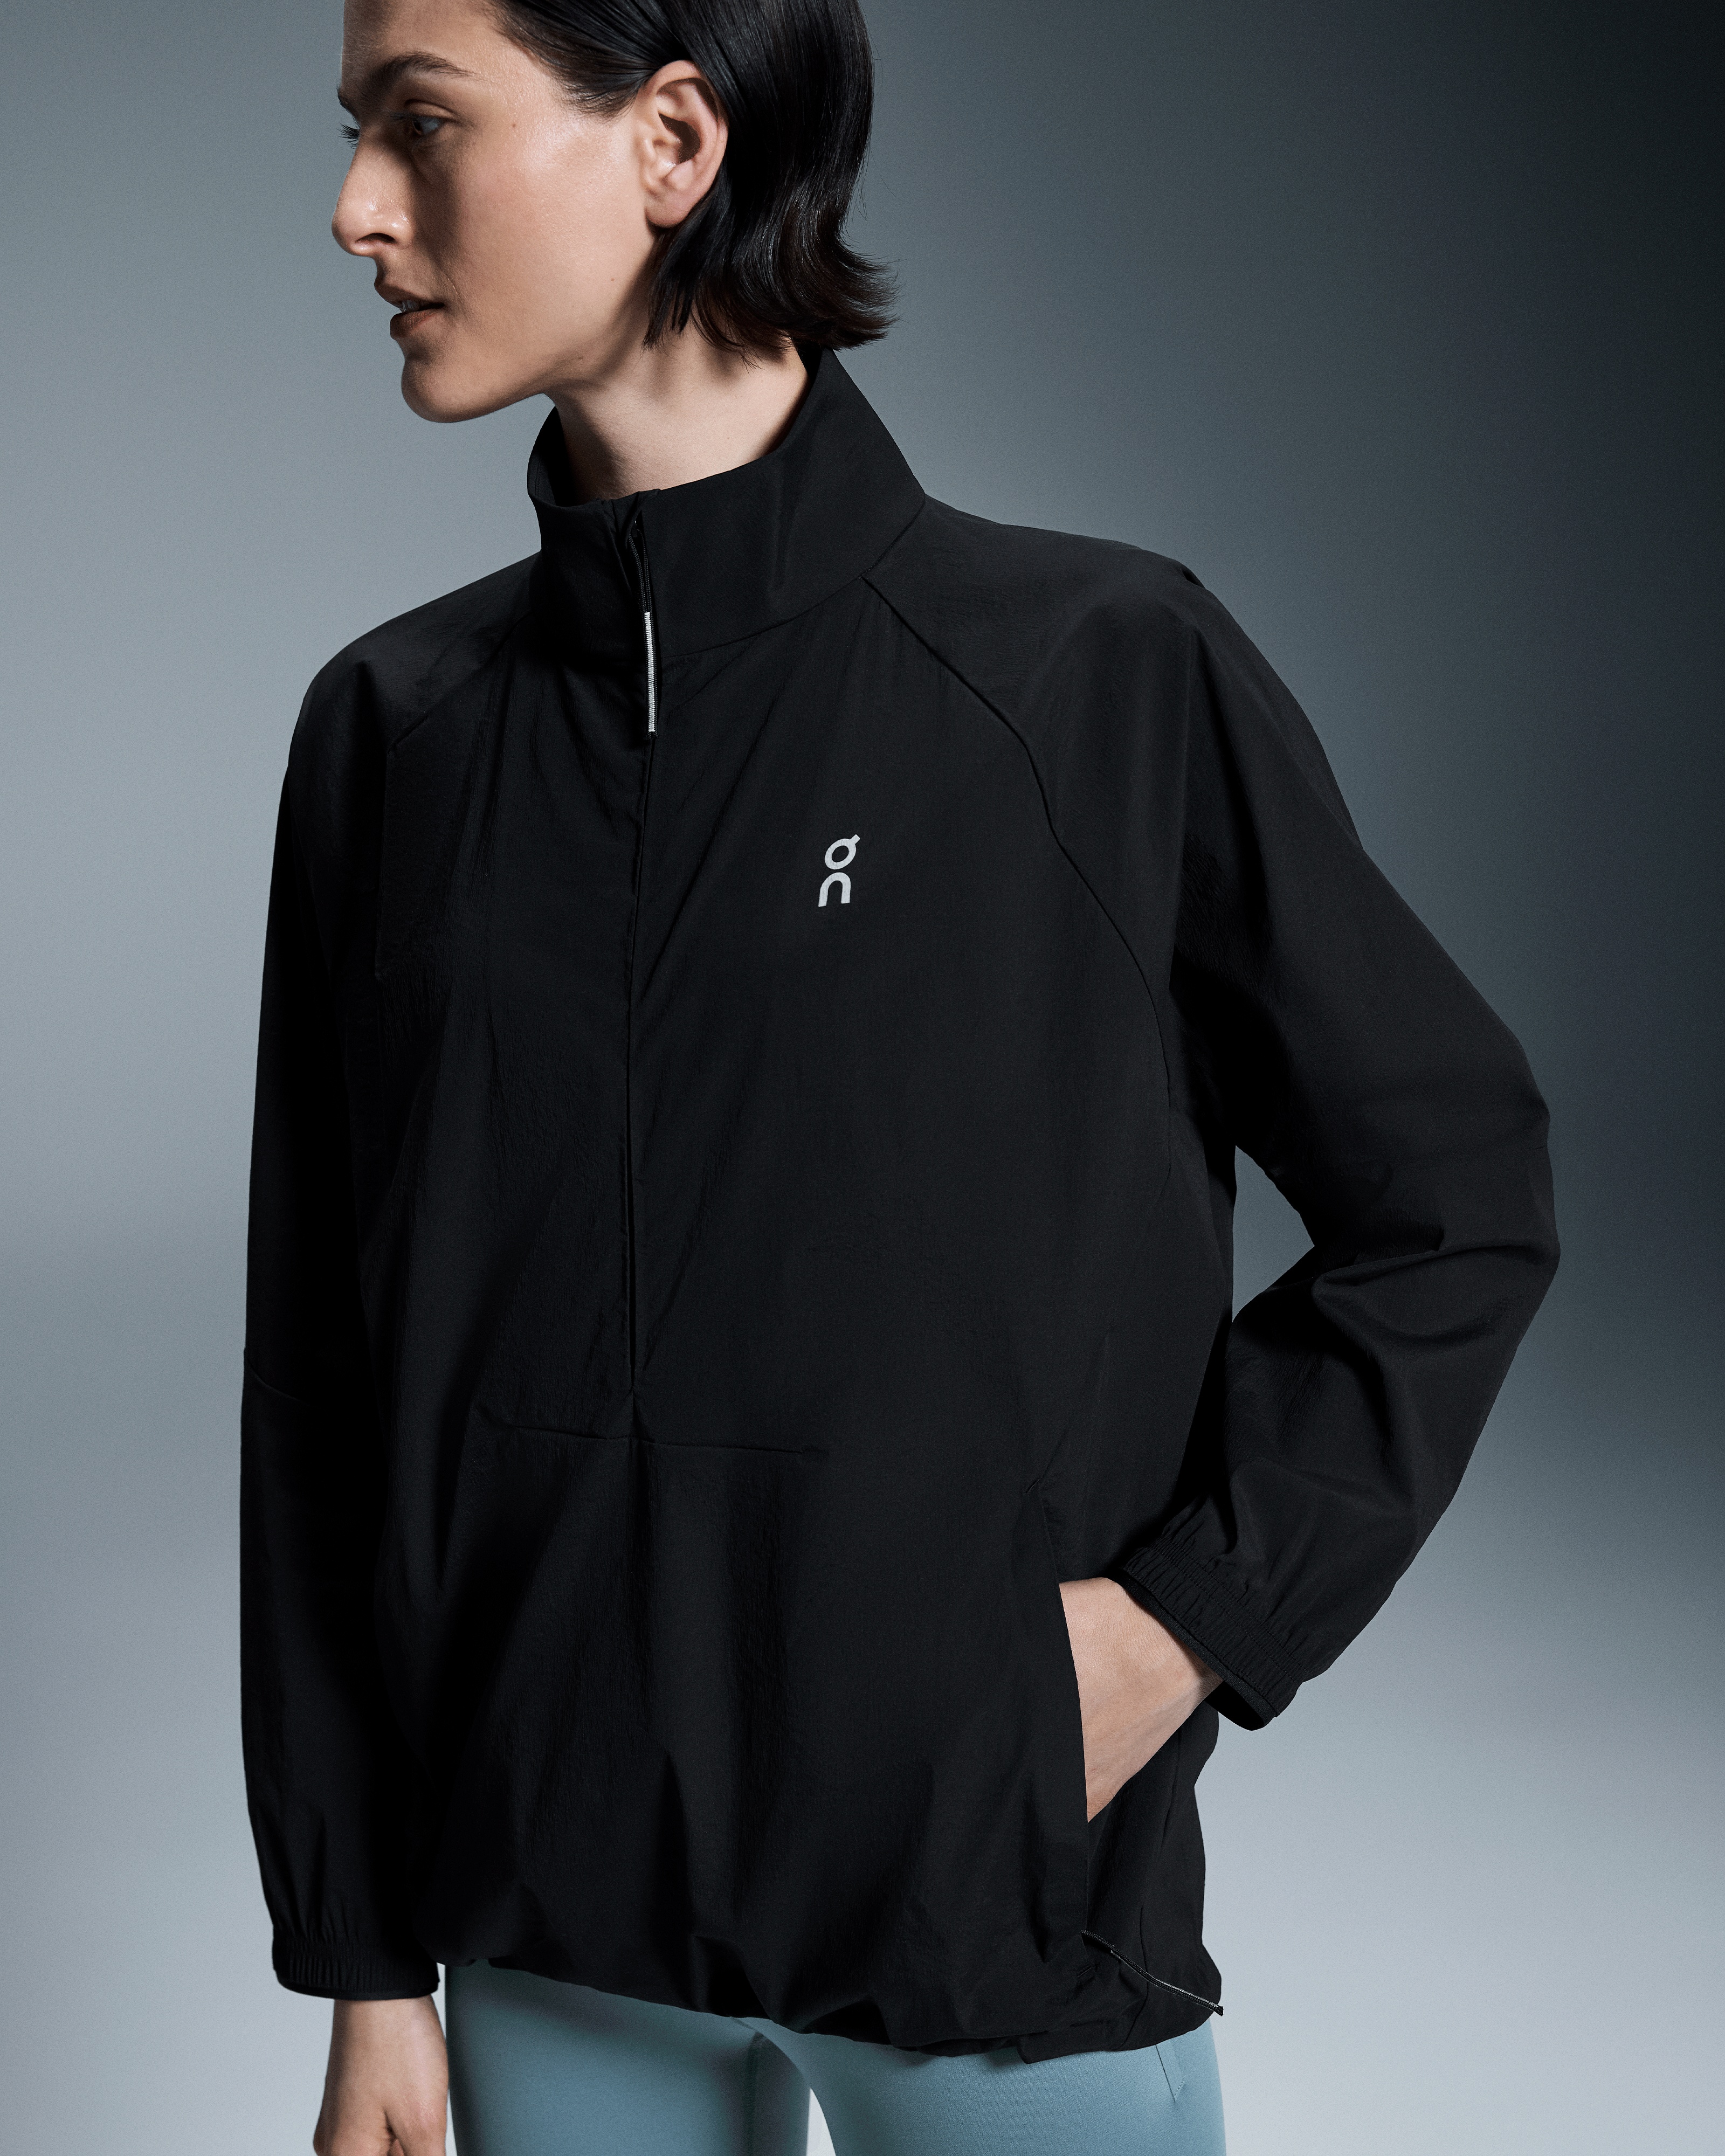 All-Day 1/2 Zip Jacket - 4